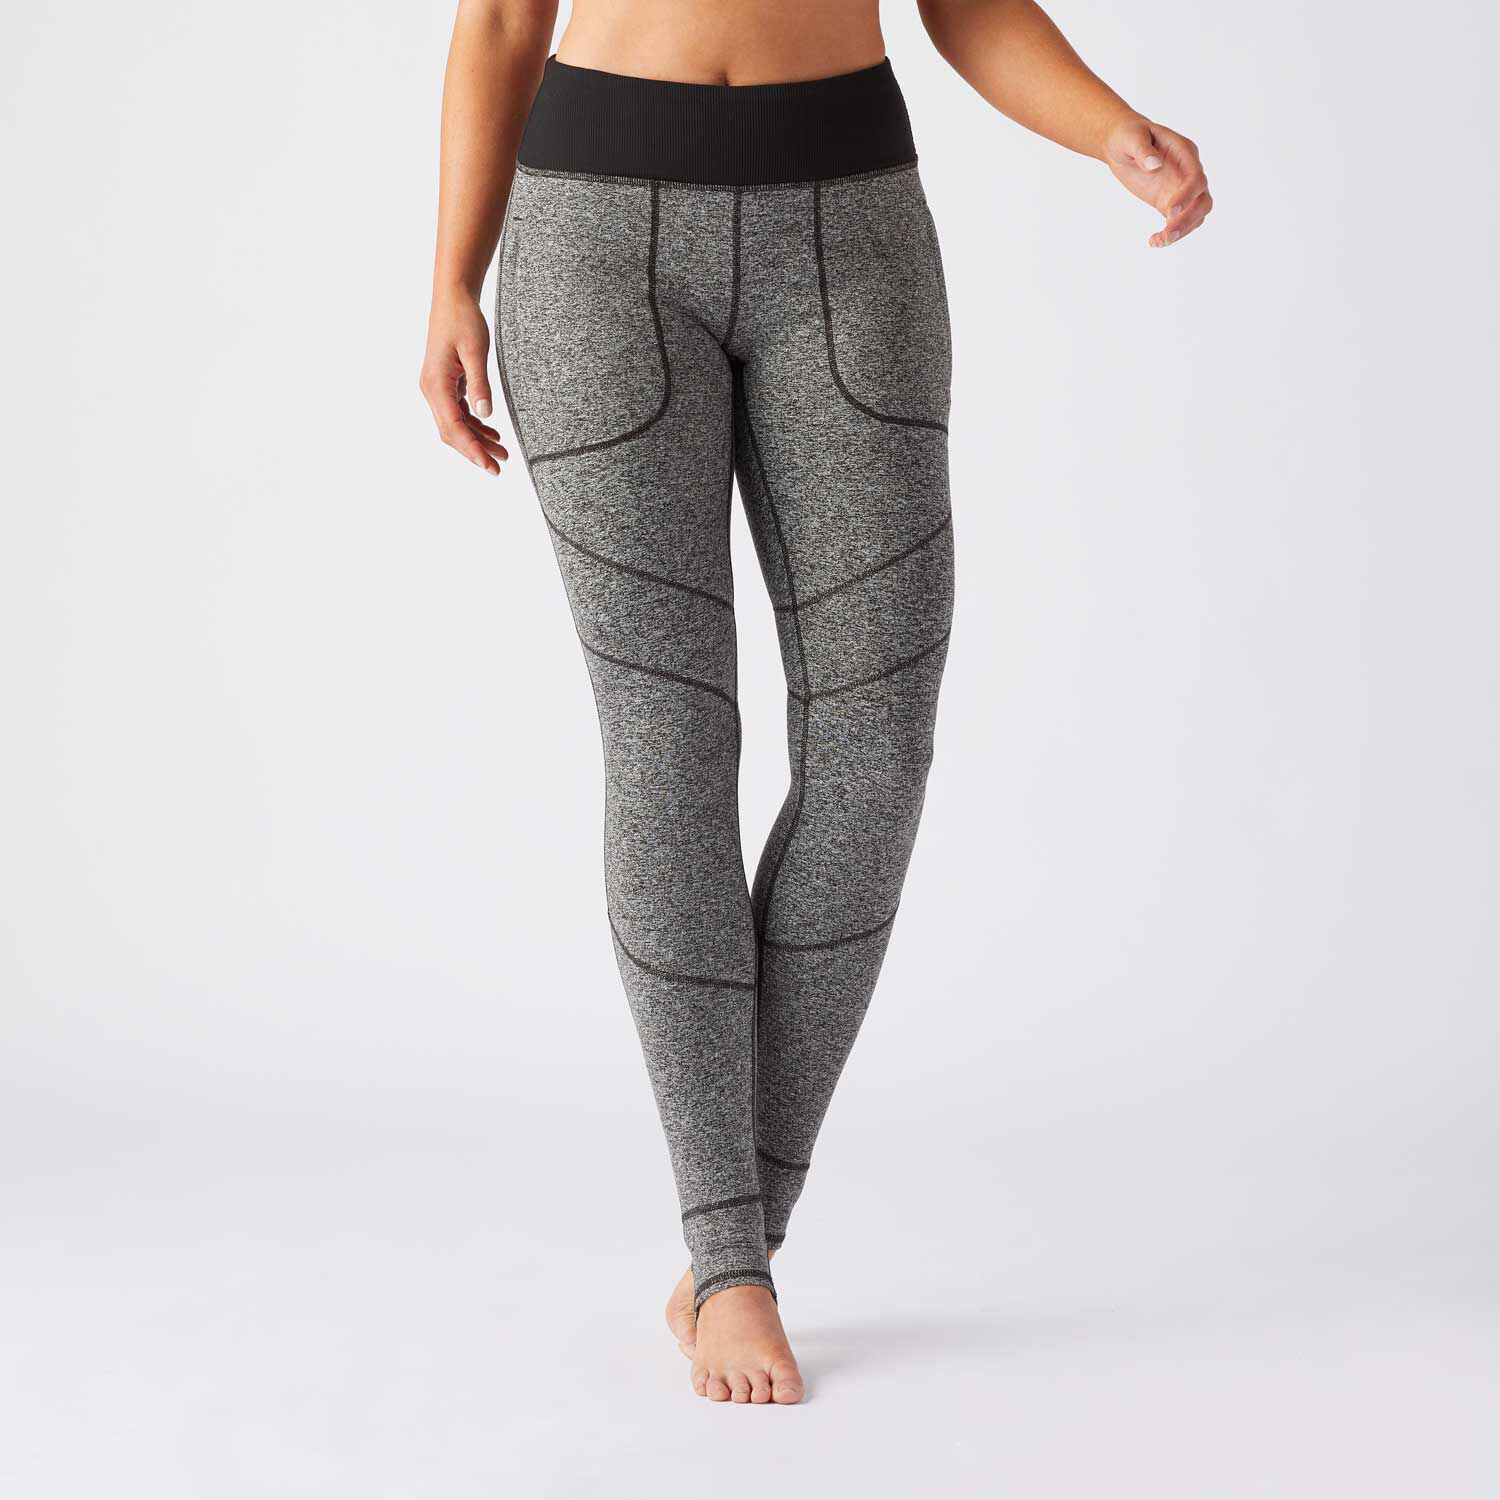 Women's Wickever Legging Base Layer | Duluth Trading Company